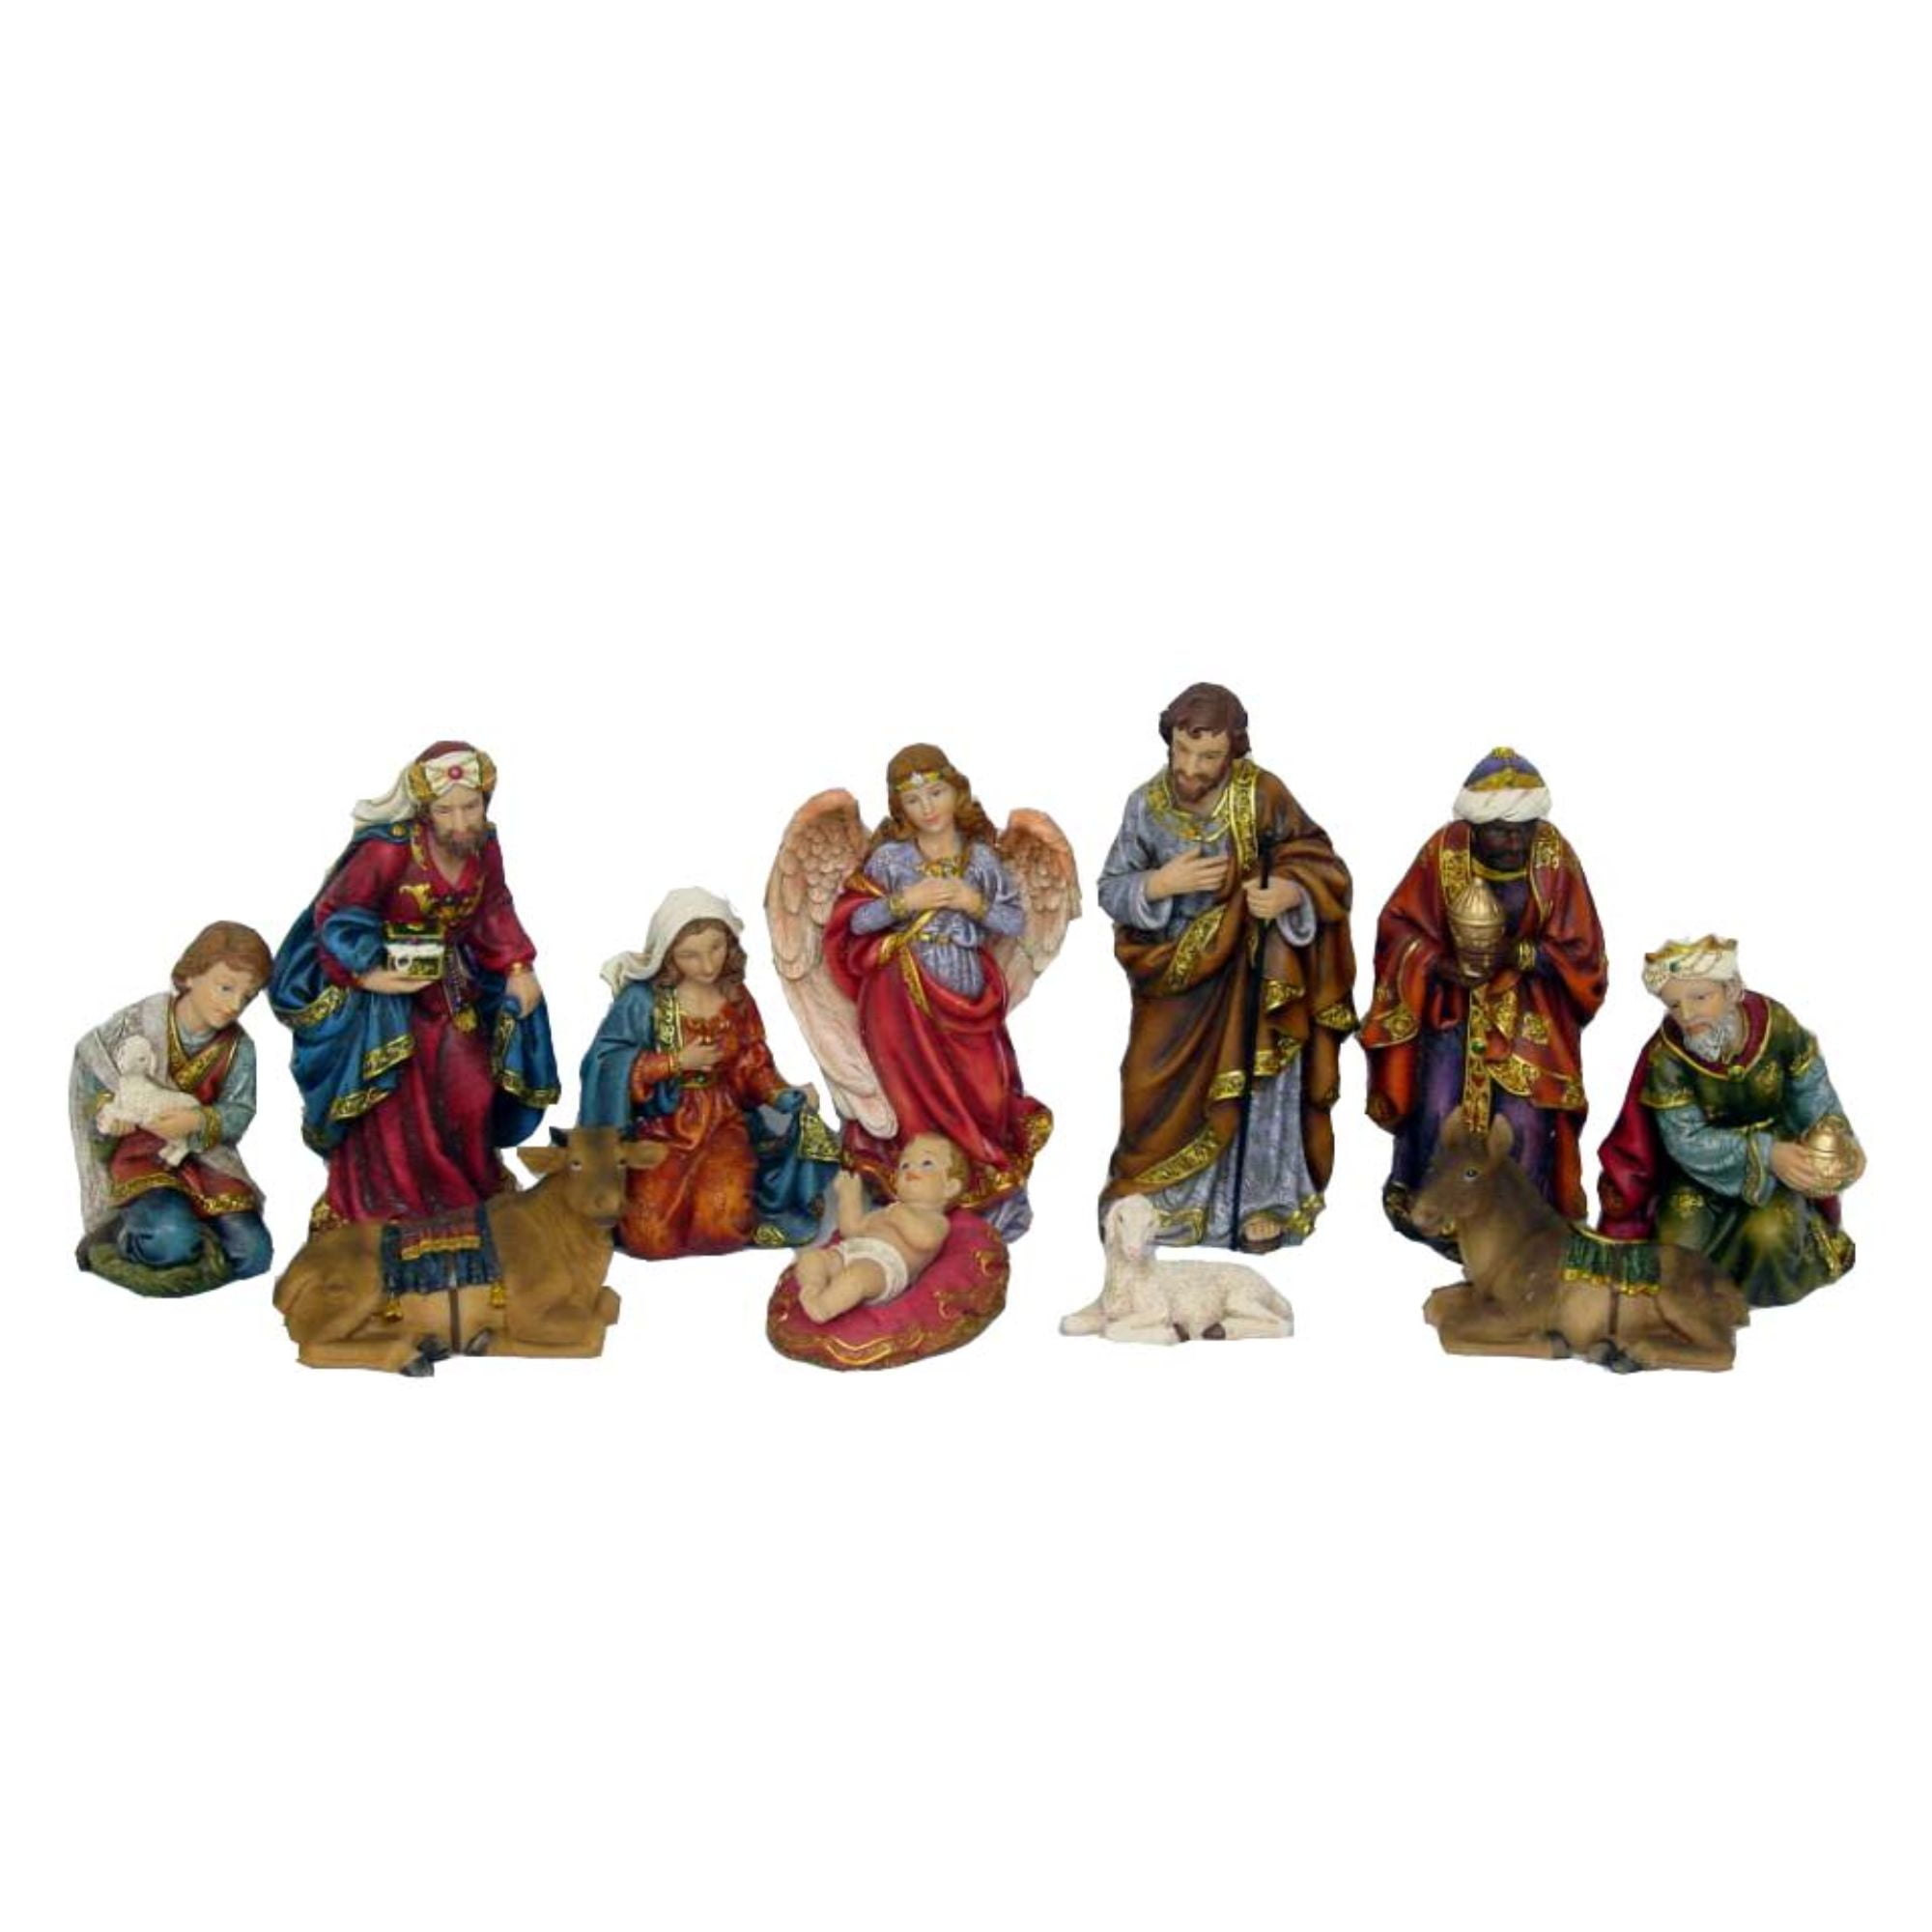 Charming Sculpted Figures with Creche for Arranging 11.5 Inches TenWaterloo Set of 12 Christmas Nativity Figurines with Creche